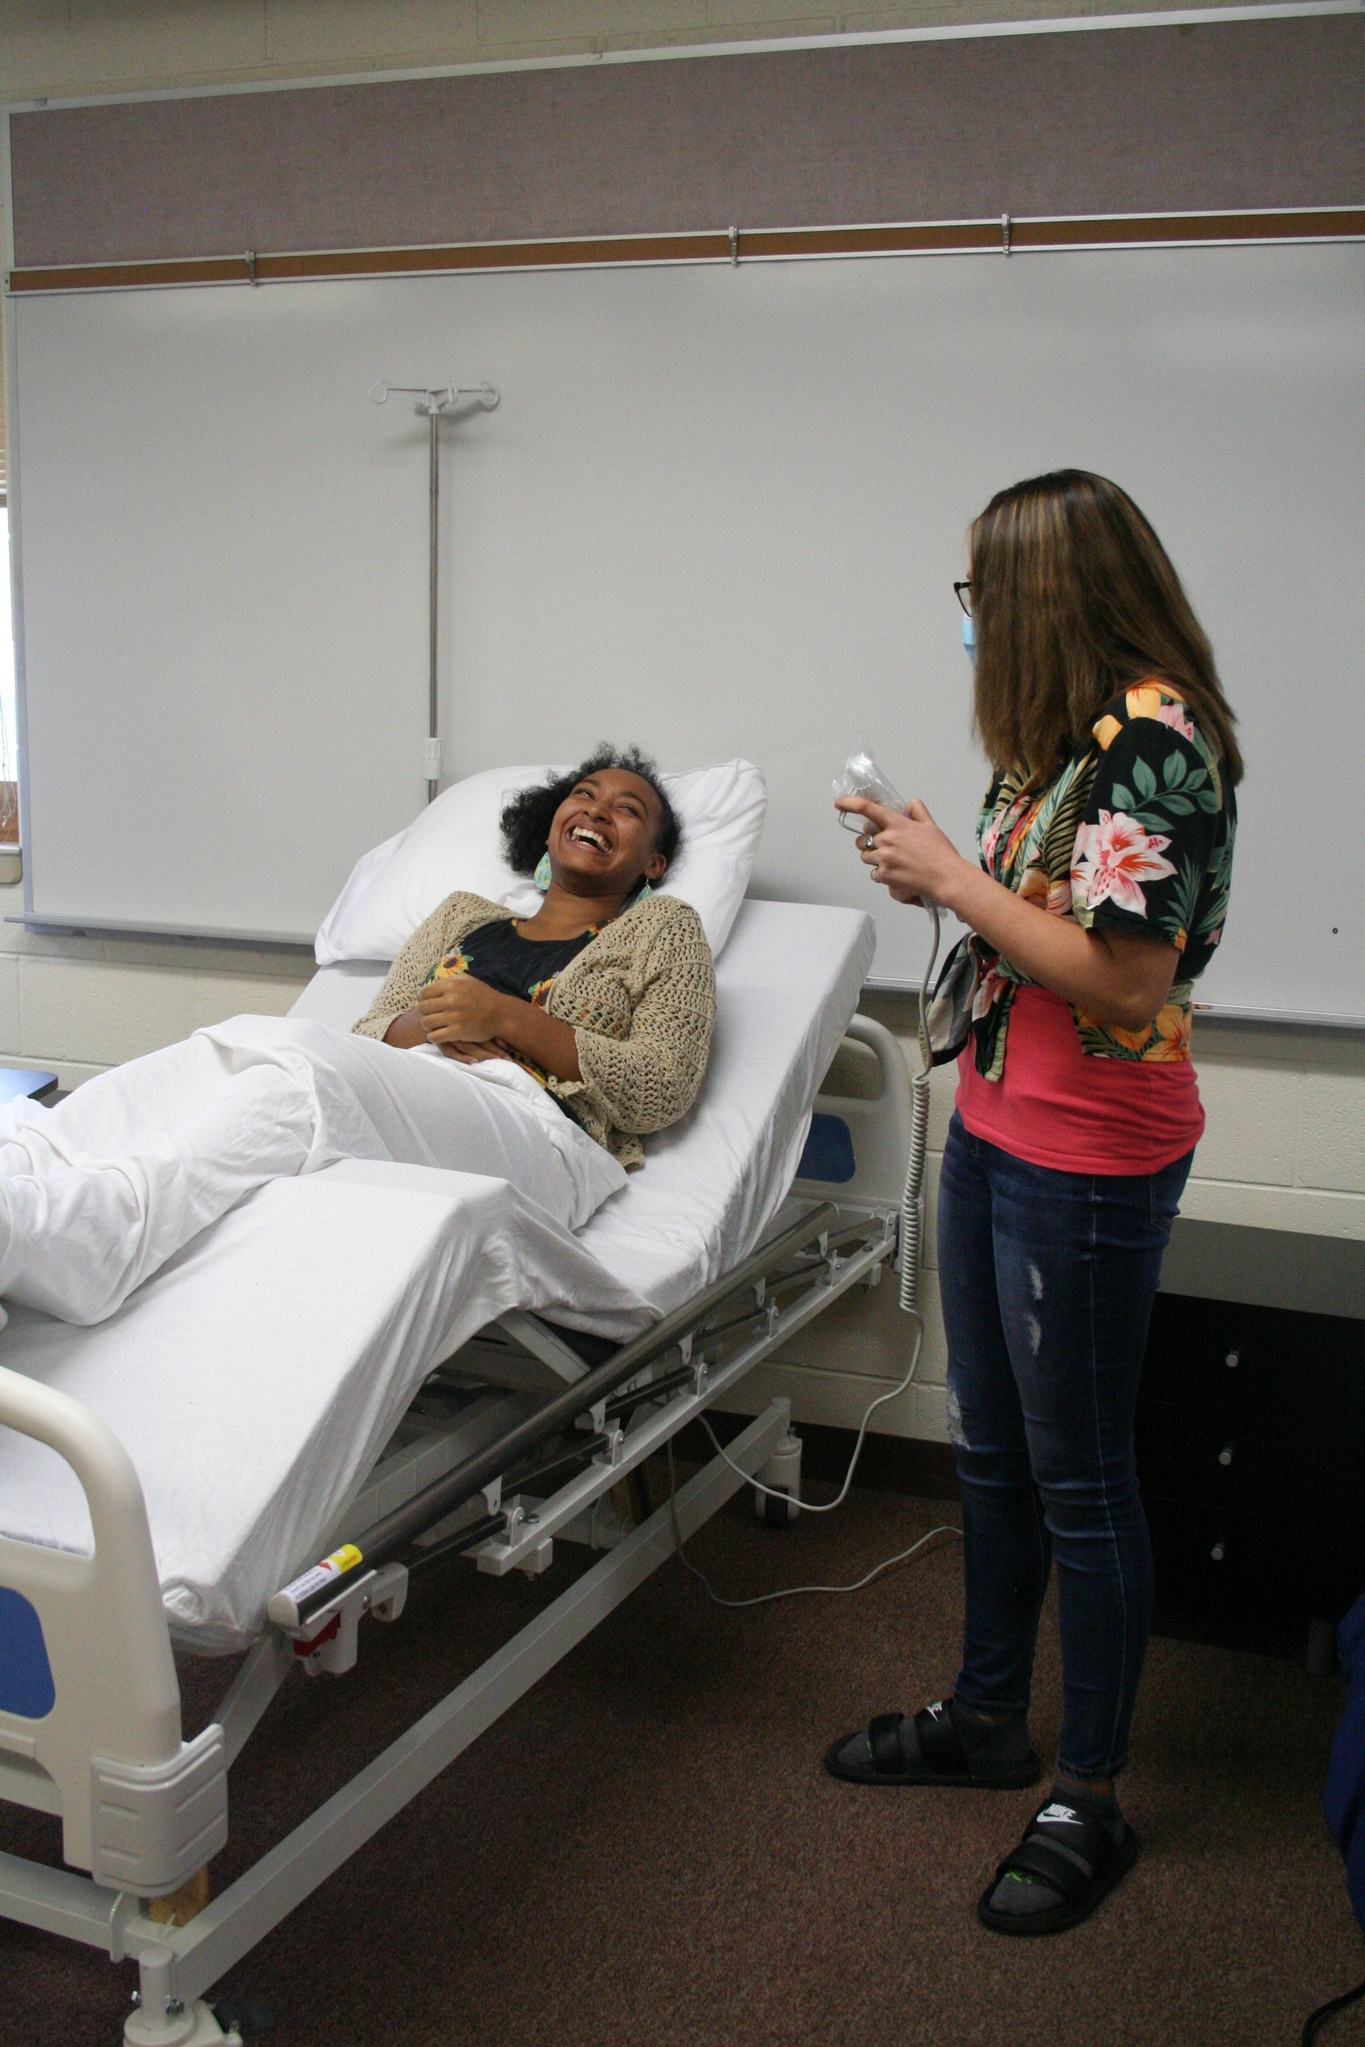 Medical Occupations students learning the bed controls and positioning